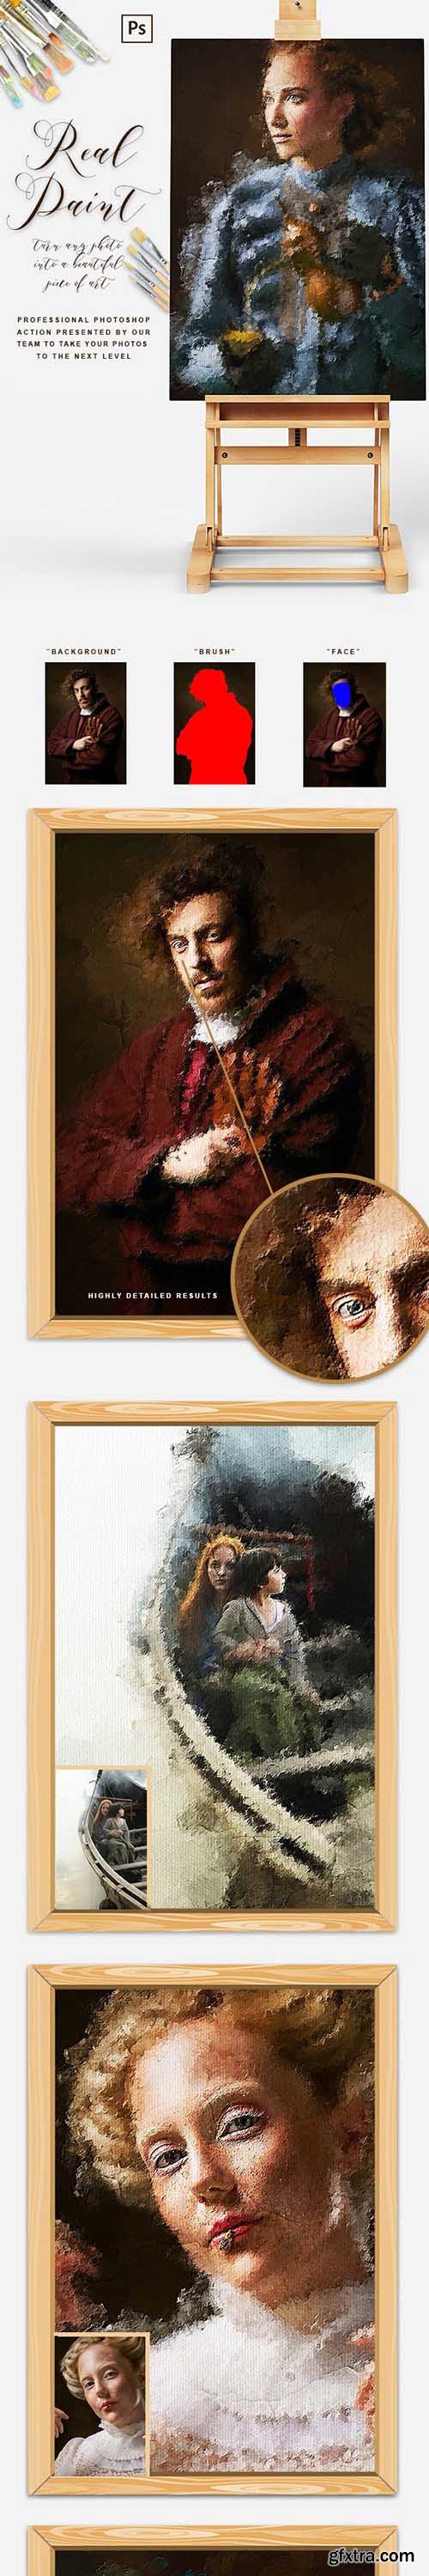 GraphicRiver - Real Paint - Photoshop Action 33396002